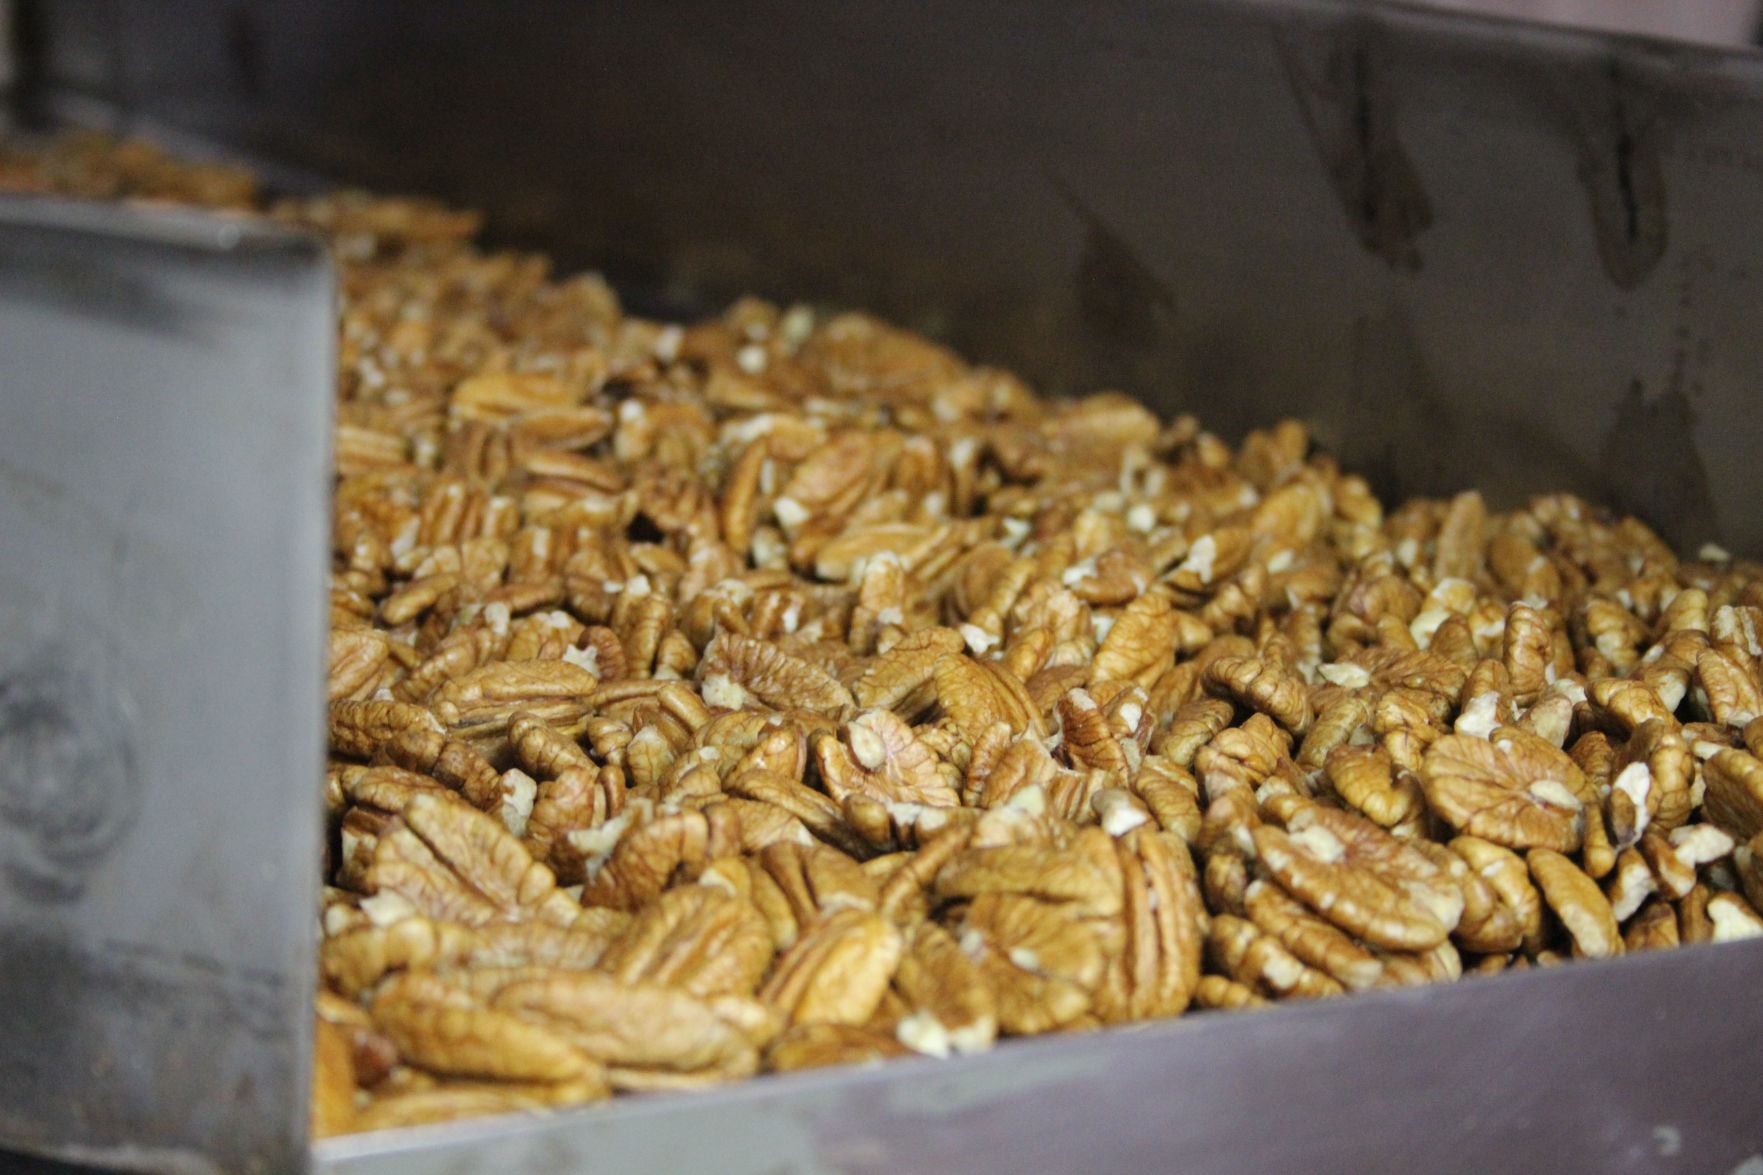 On average, the harvested pecan meat from papershell pecans runs from 50 to 62 percent. A native pecan runs anywhere from 30 to 42 percent. (Journal photo by Lacey Newlin.)